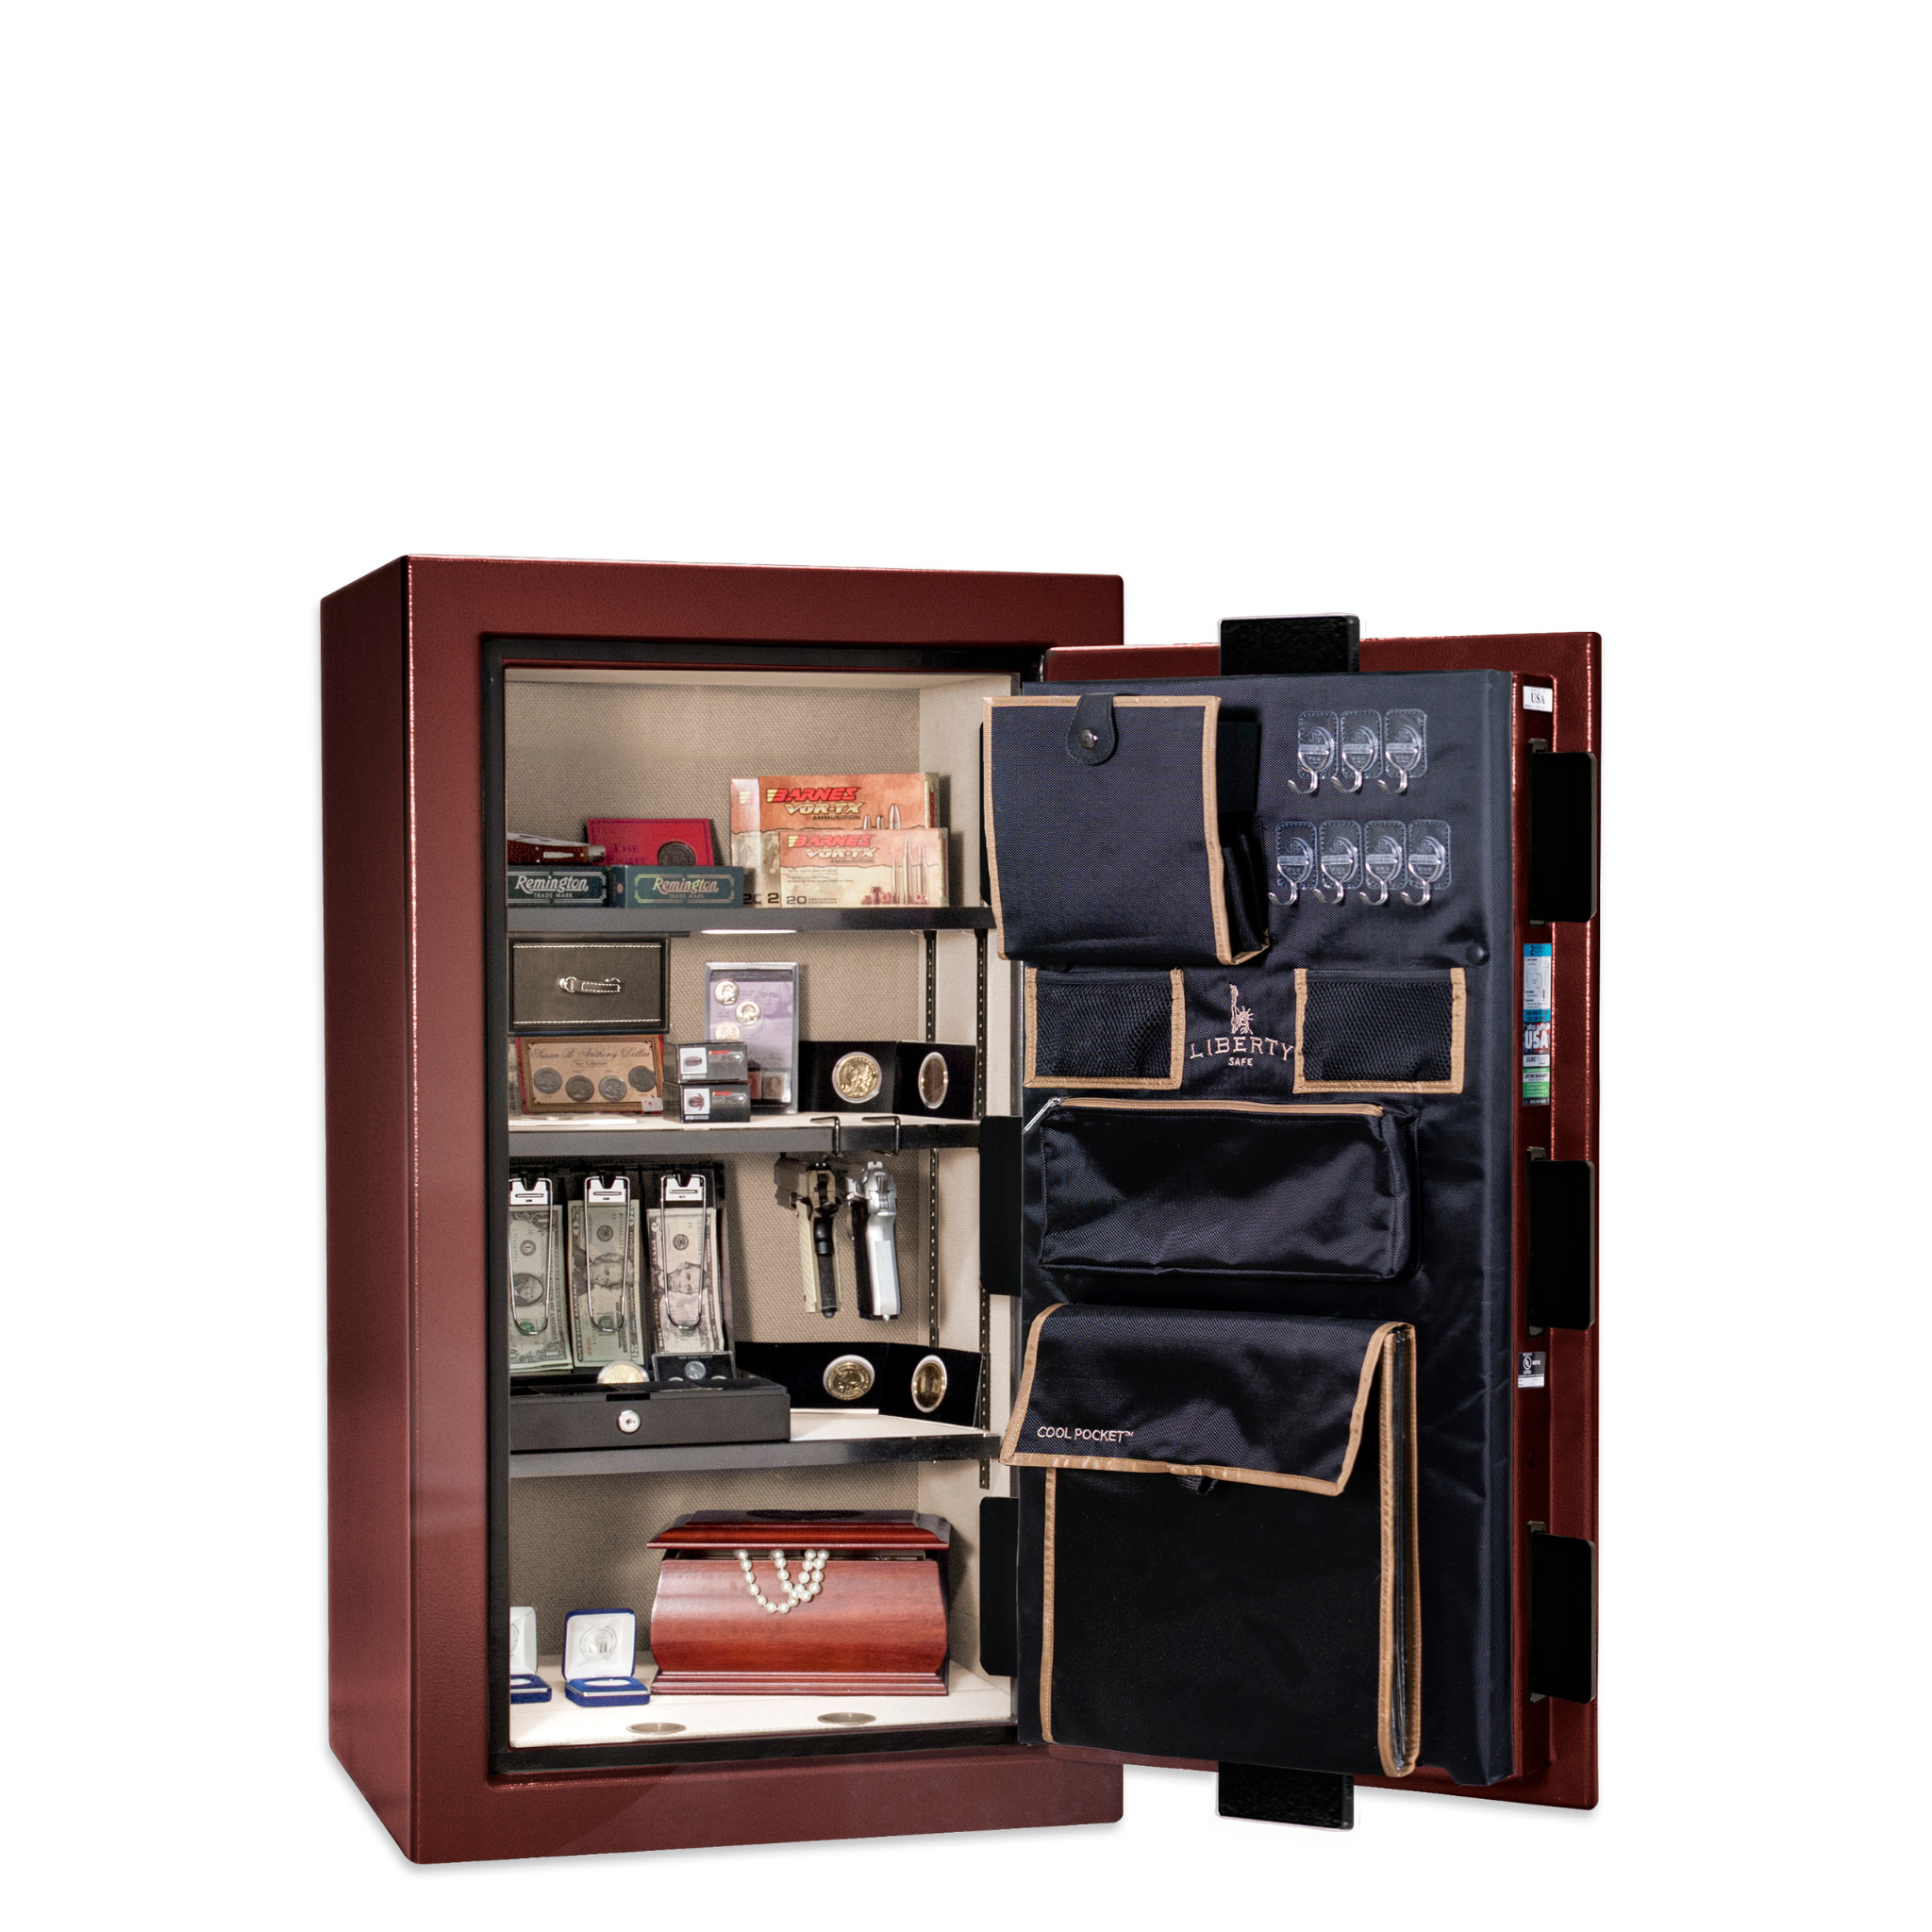 Premium Home Series | Level 7 Security | 2 Hour Fire Protection | 12 | Dimensions: 41.75"(H) x 24.5"(W) x 19"(D) | Burgundy Gloss Brass - Open Door